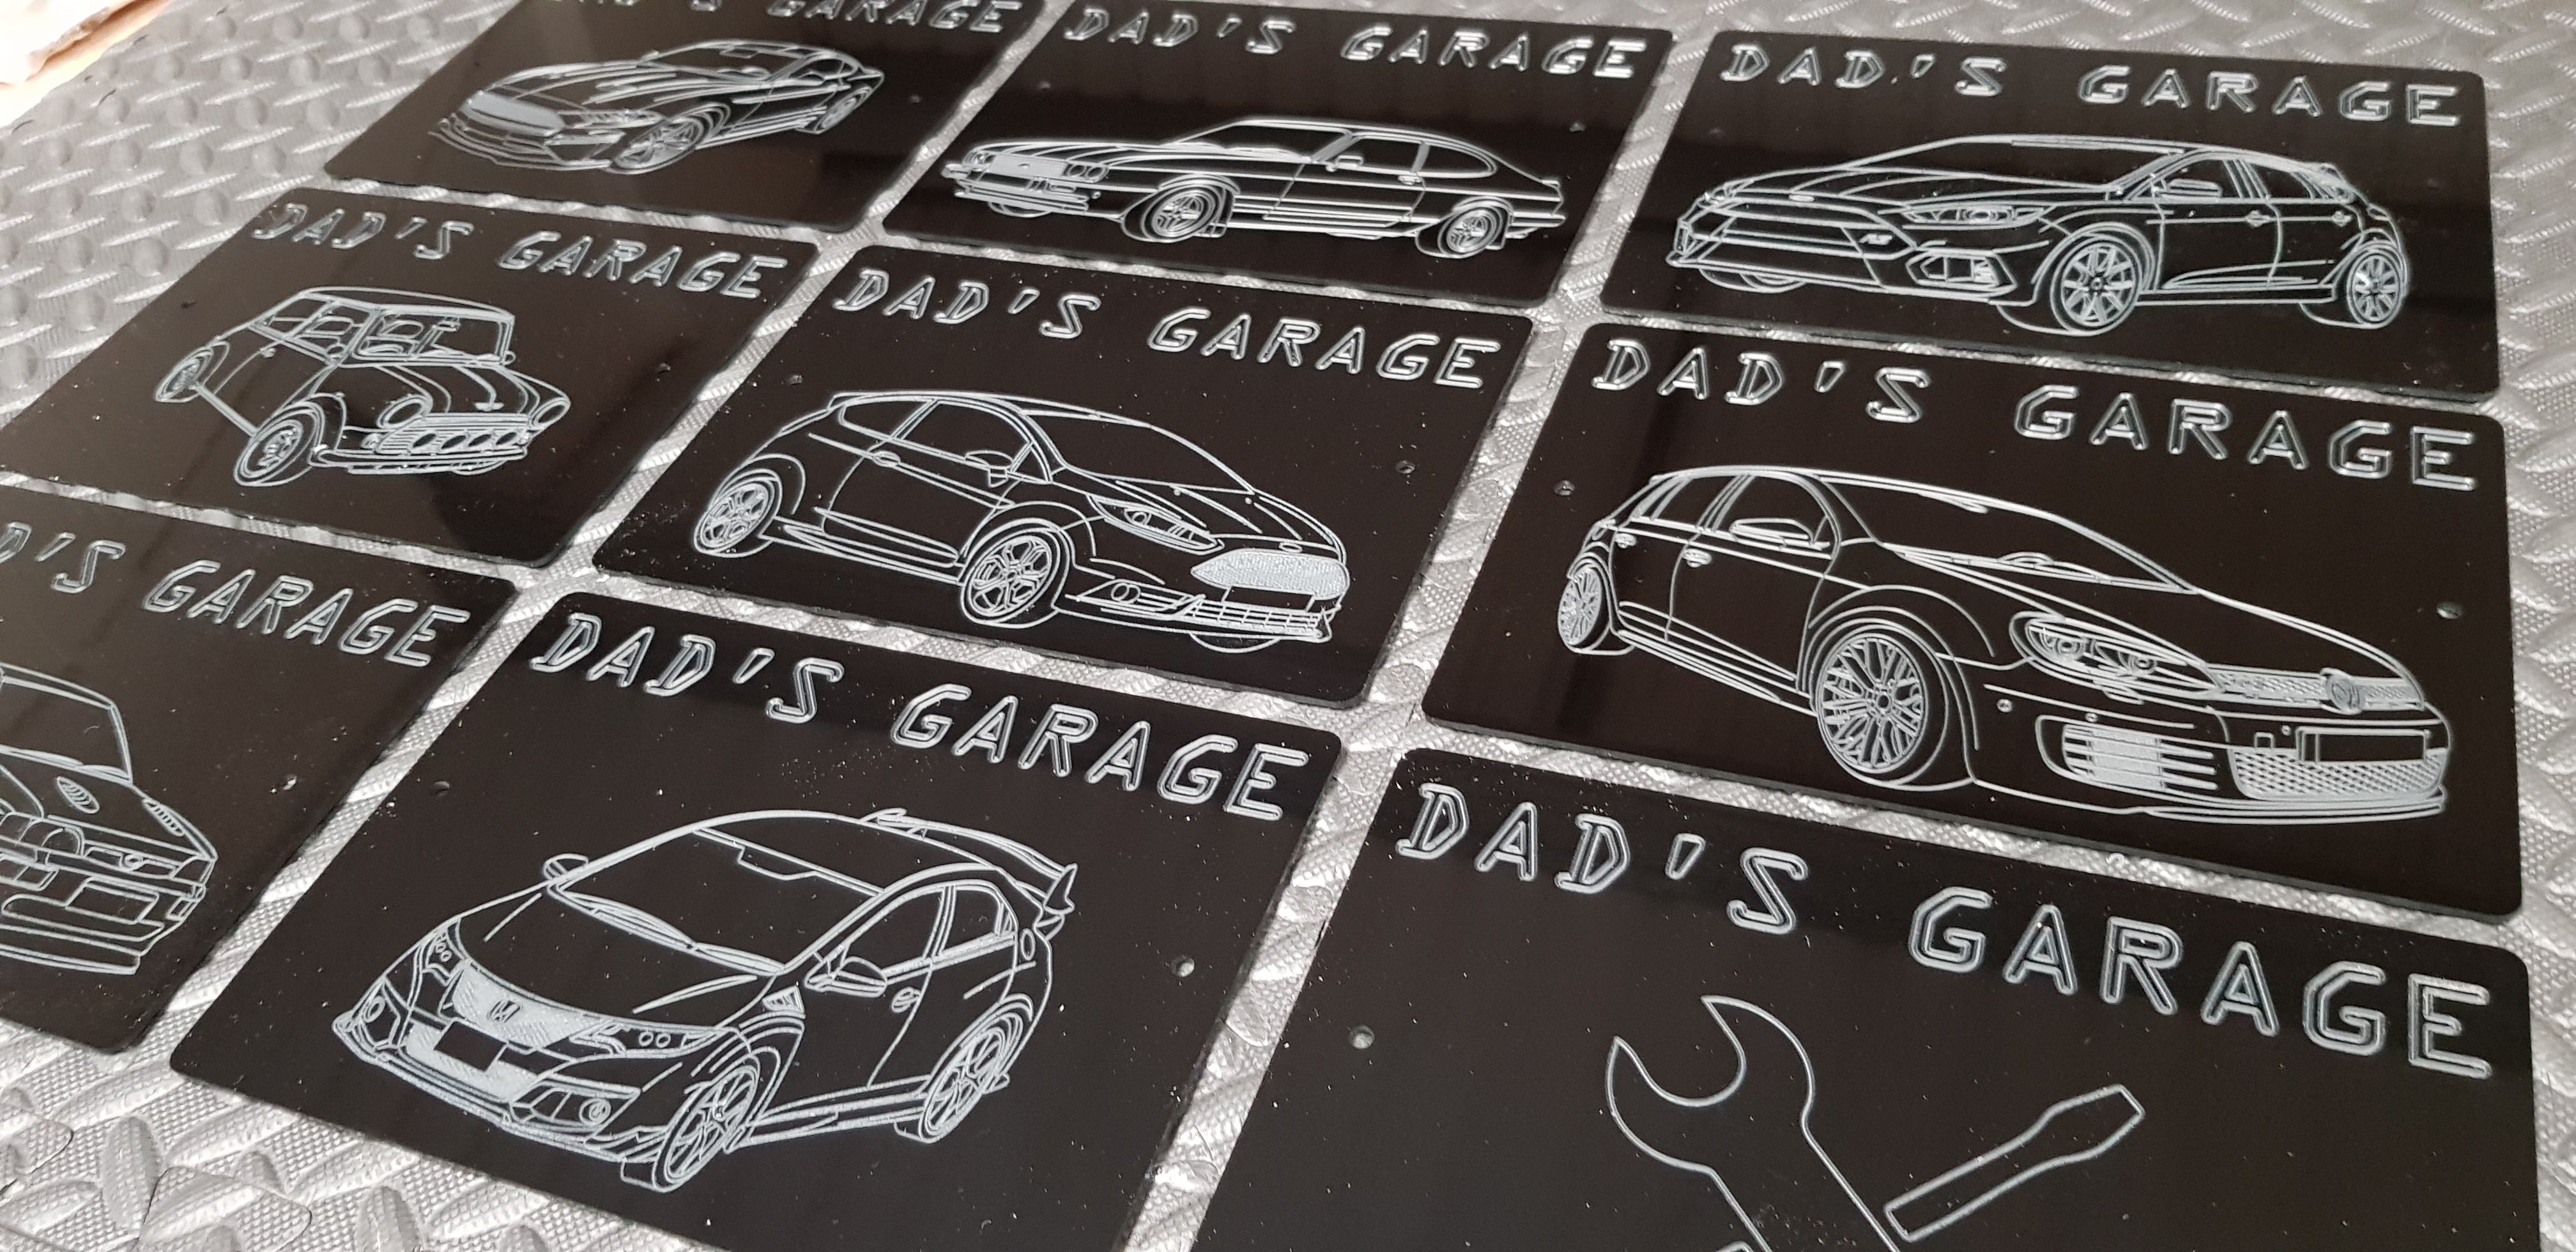 Clearance - Dad's Garage Sign - Various Designs